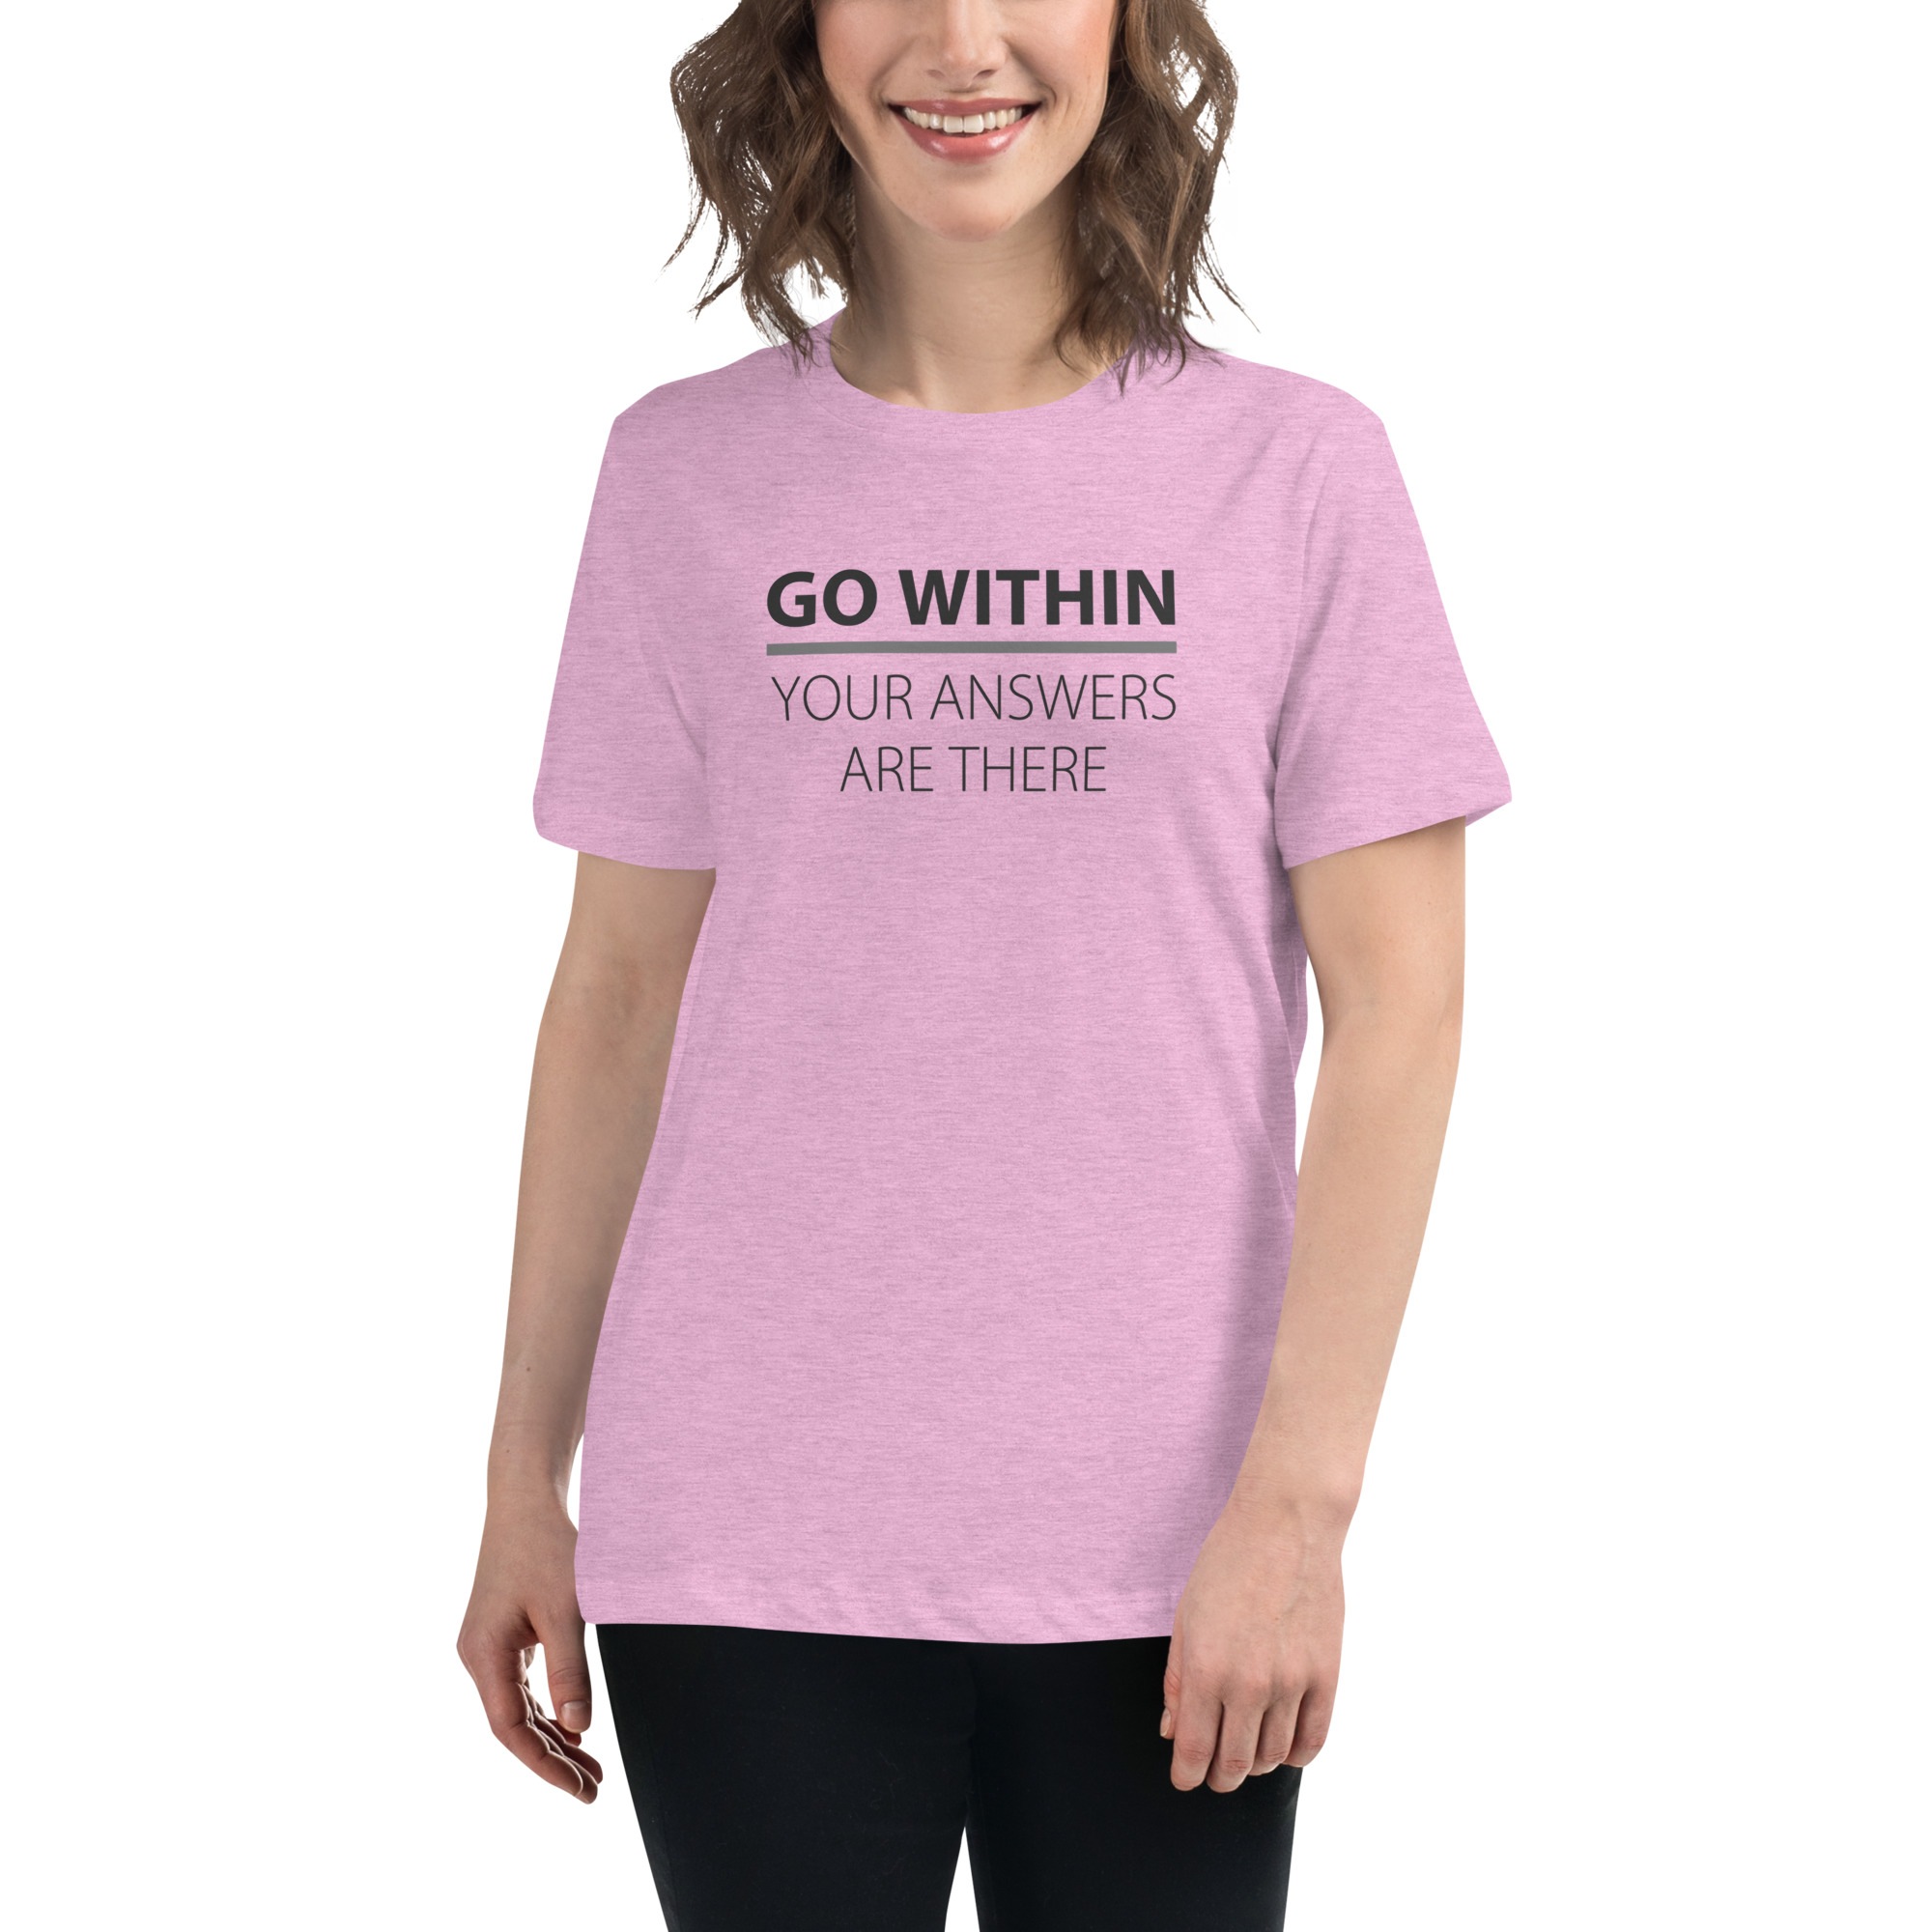 Go Within Your Answers Are There T-shirt